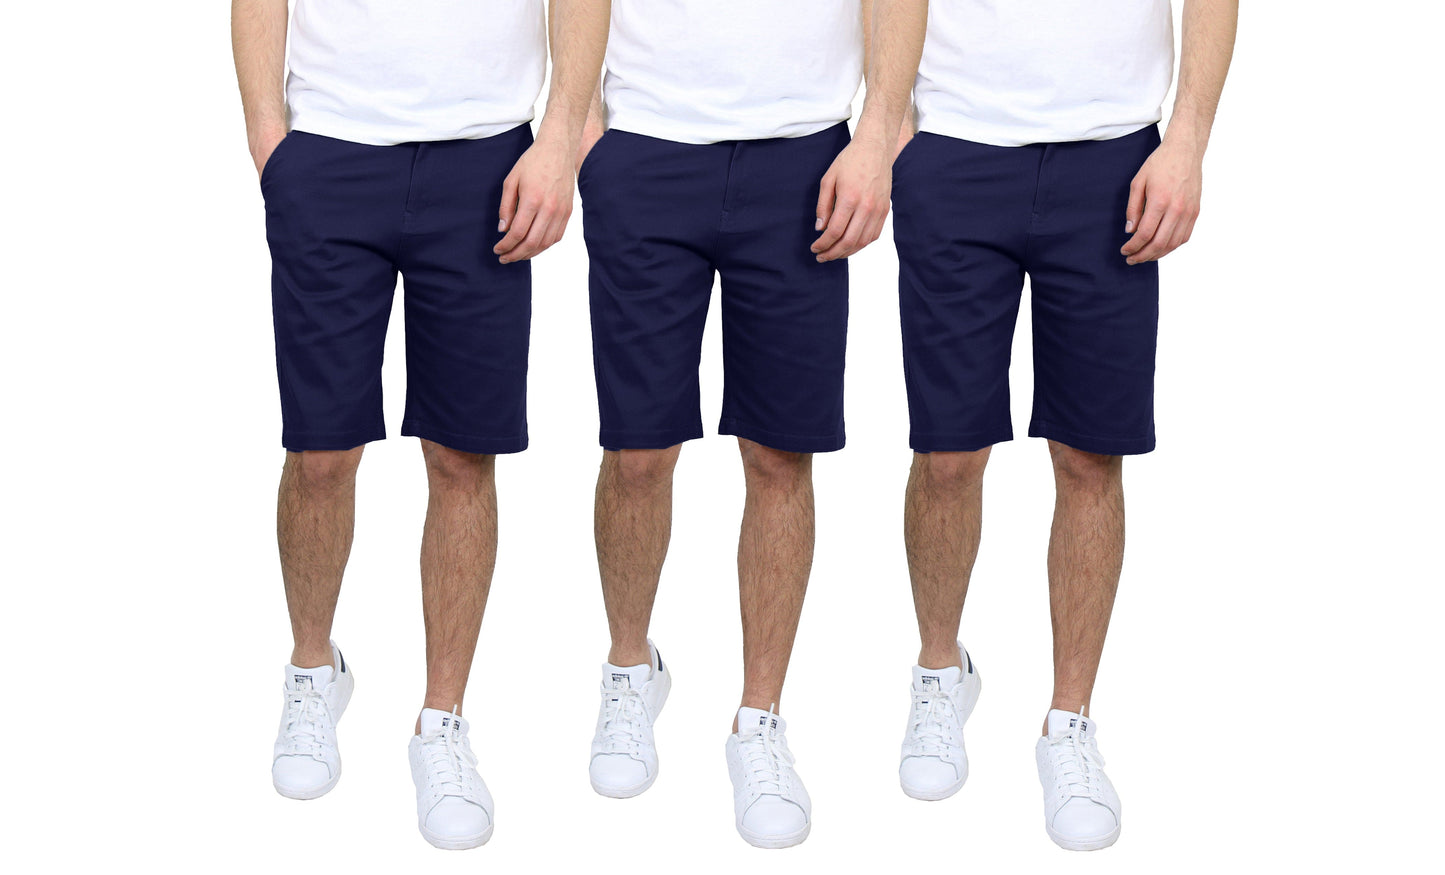 Men's 3Pack Cotton Stretch Chino Shorts - GalaxybyHarvic